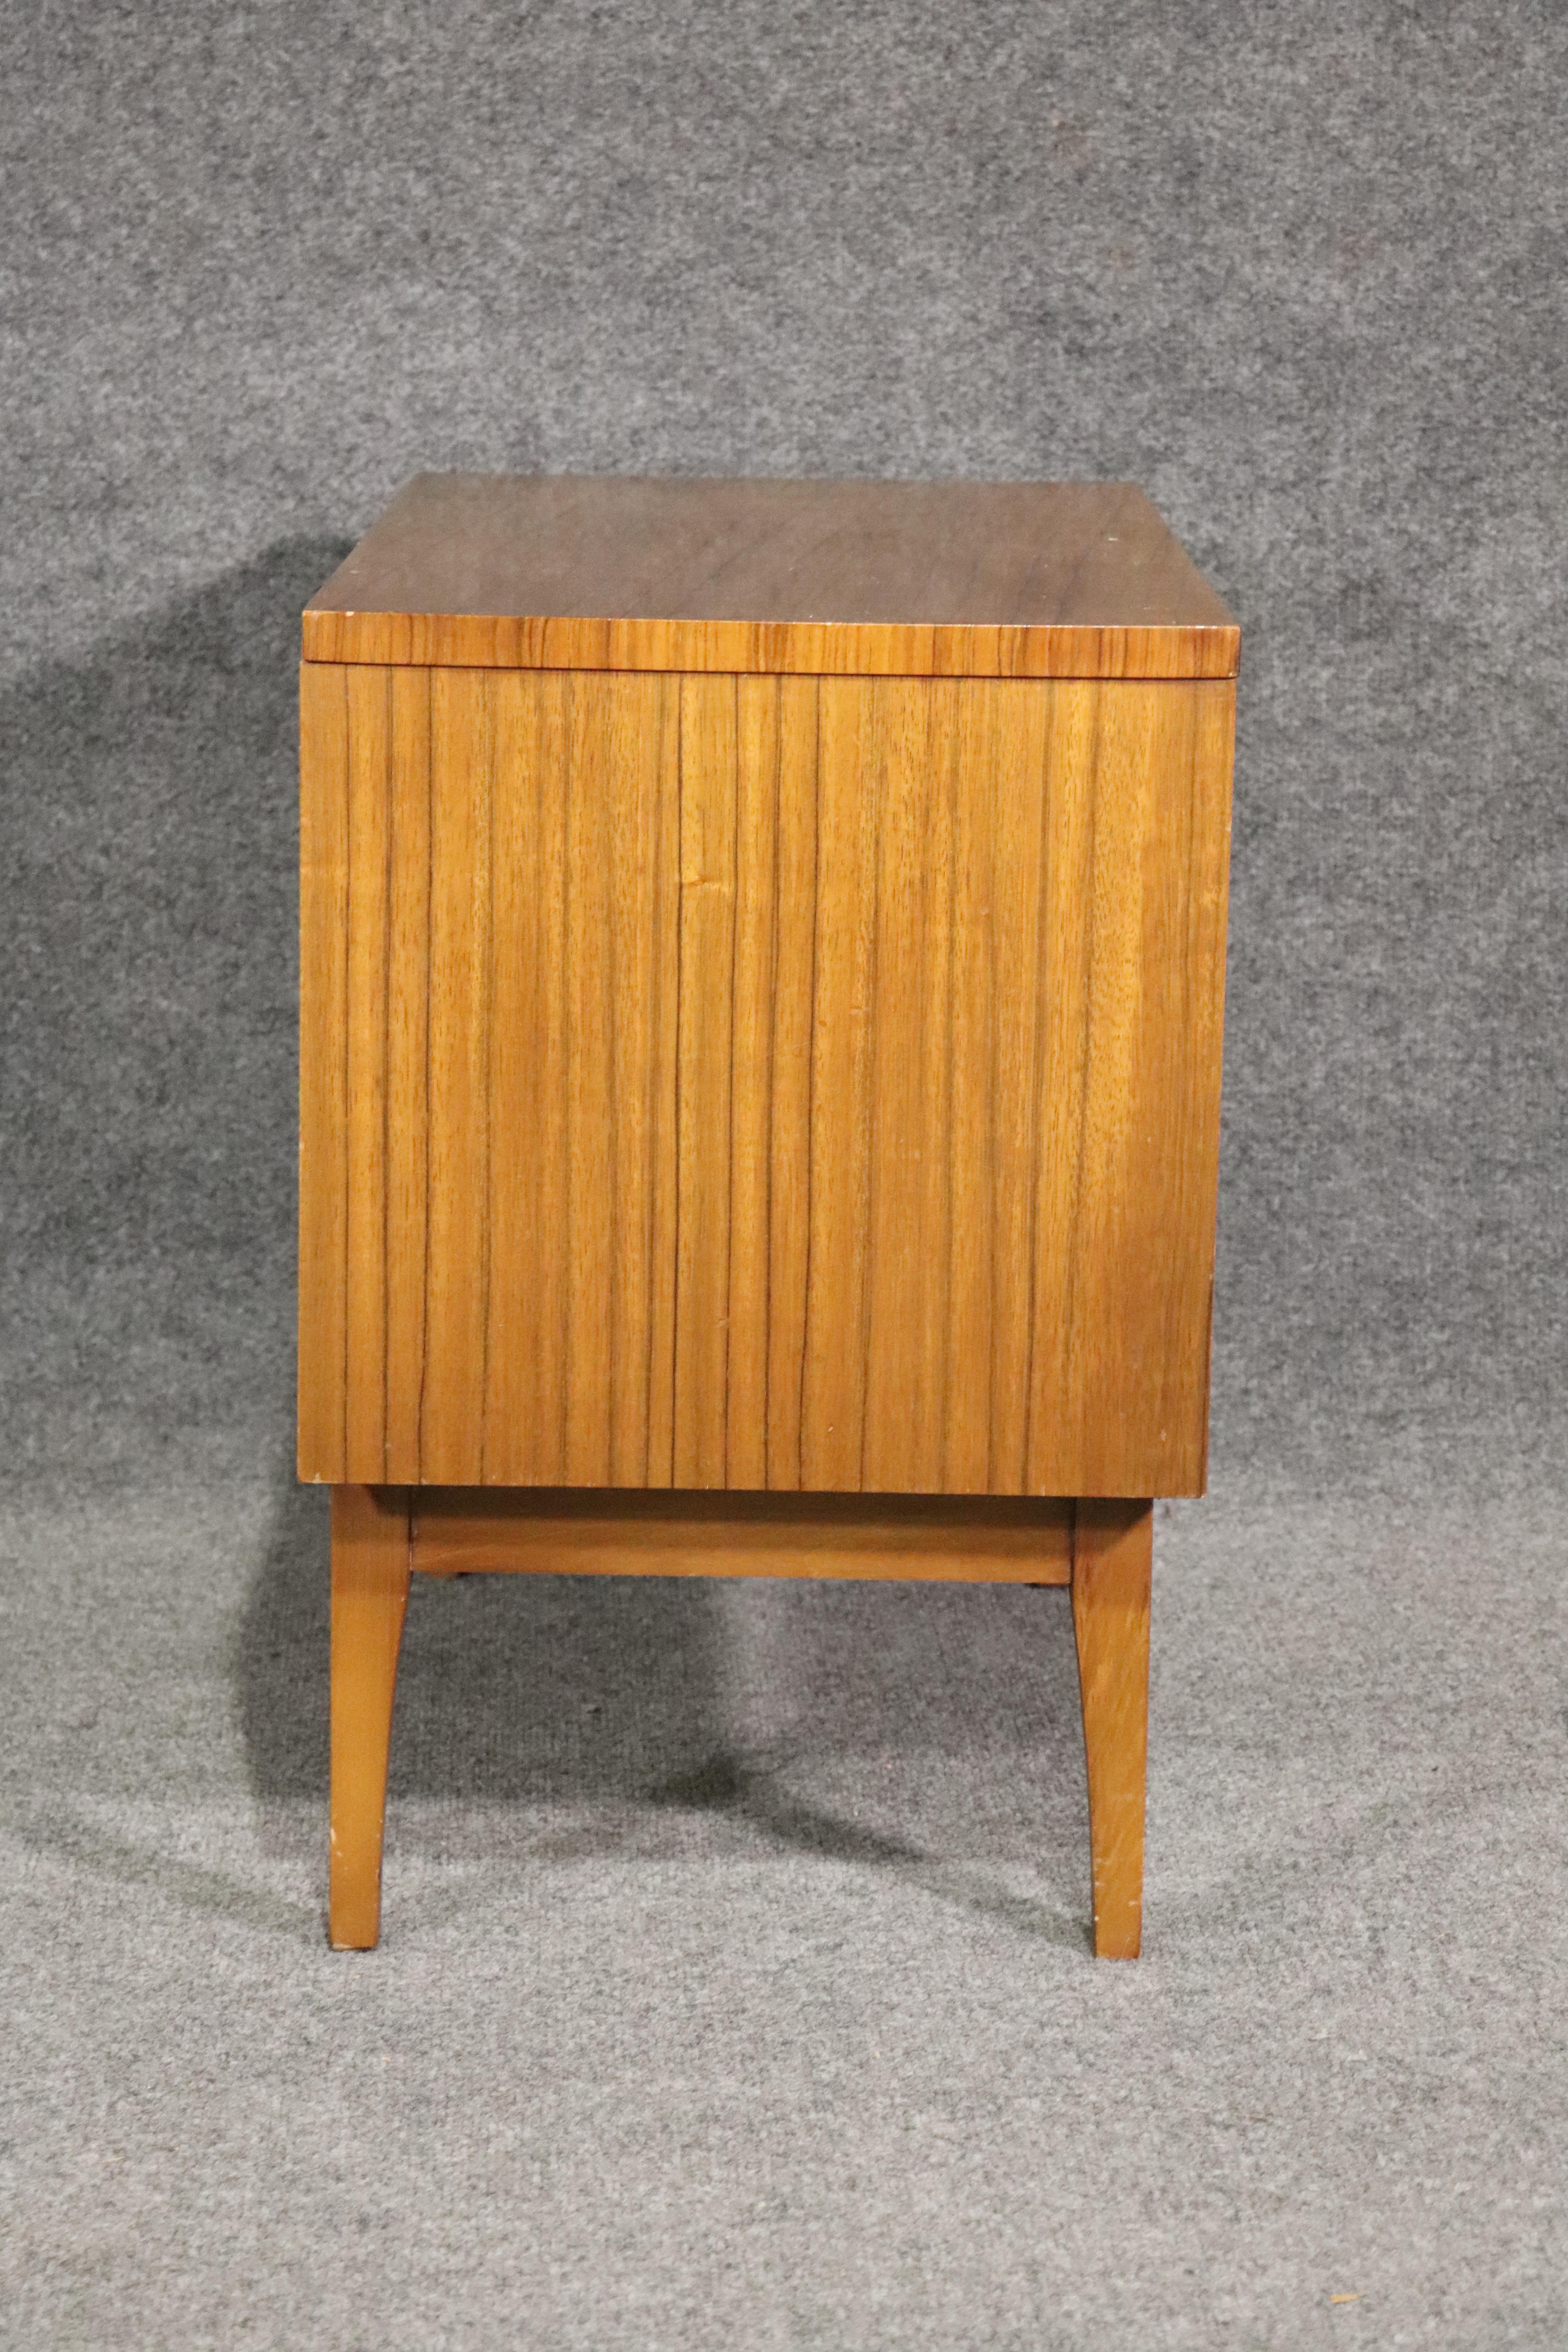 Lane Furniture Nightstand w/ Inlay In Good Condition For Sale In Brooklyn, NY